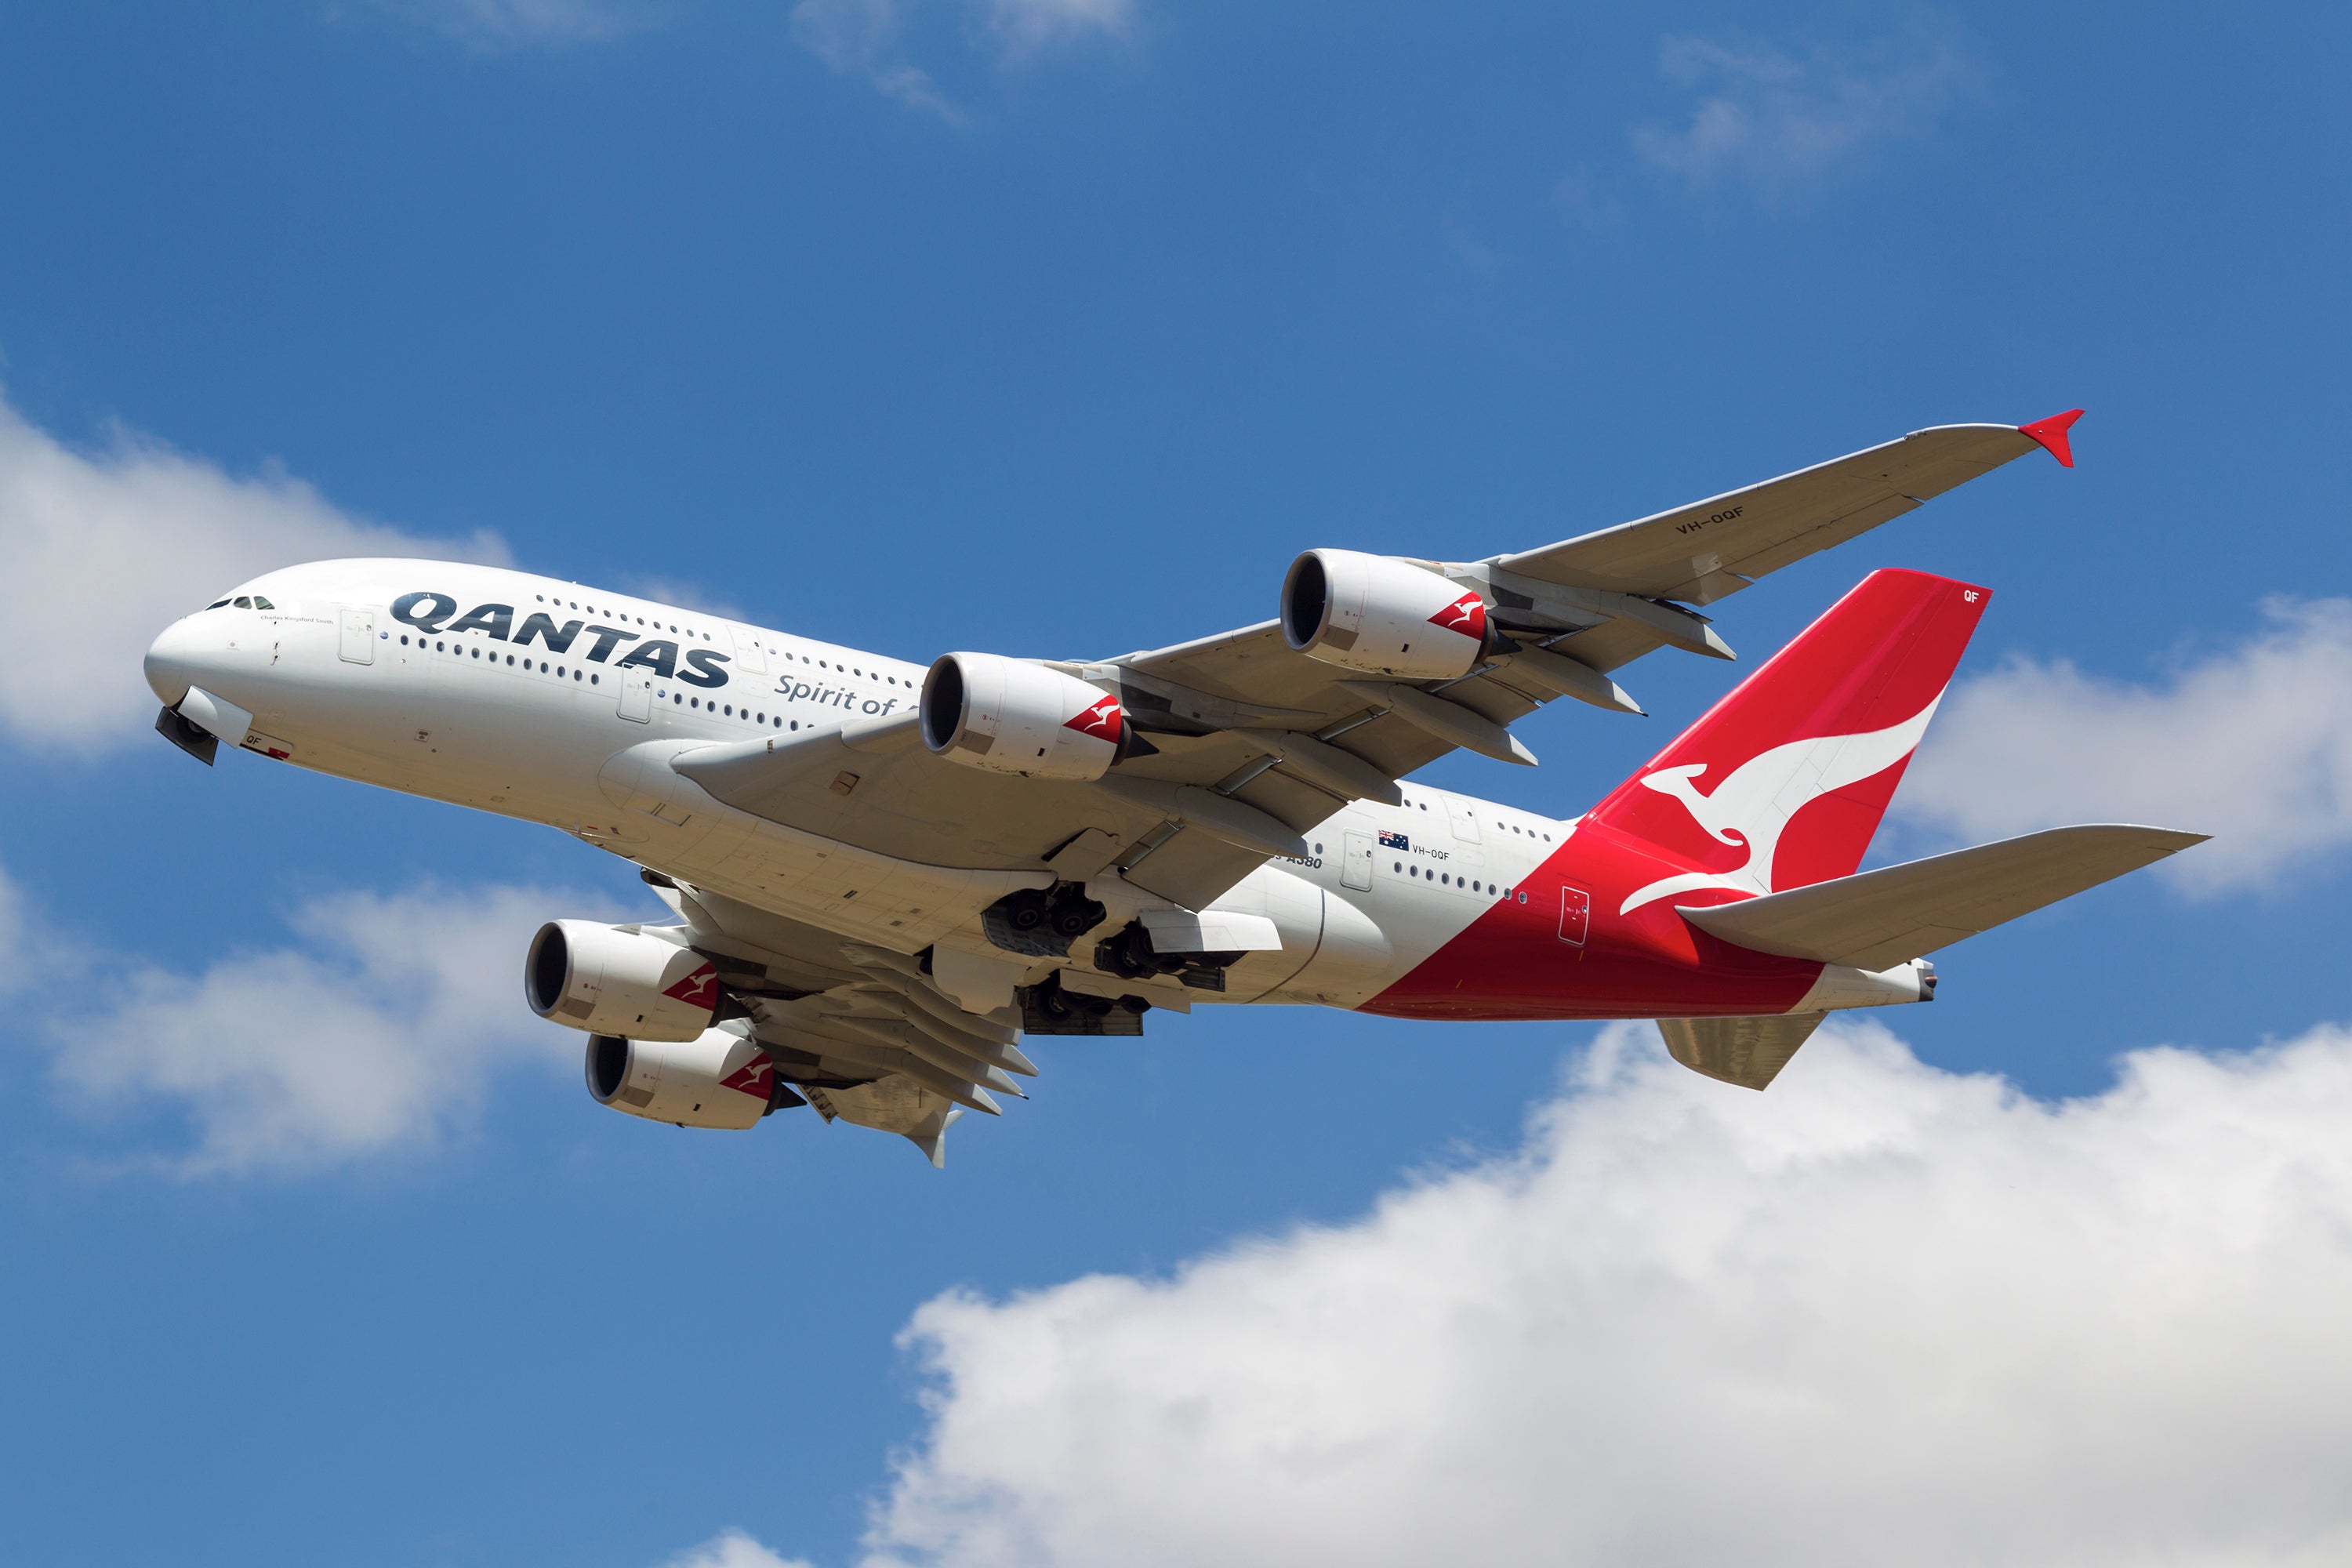 The plane was flying from Perth to Port Hedland in Australia